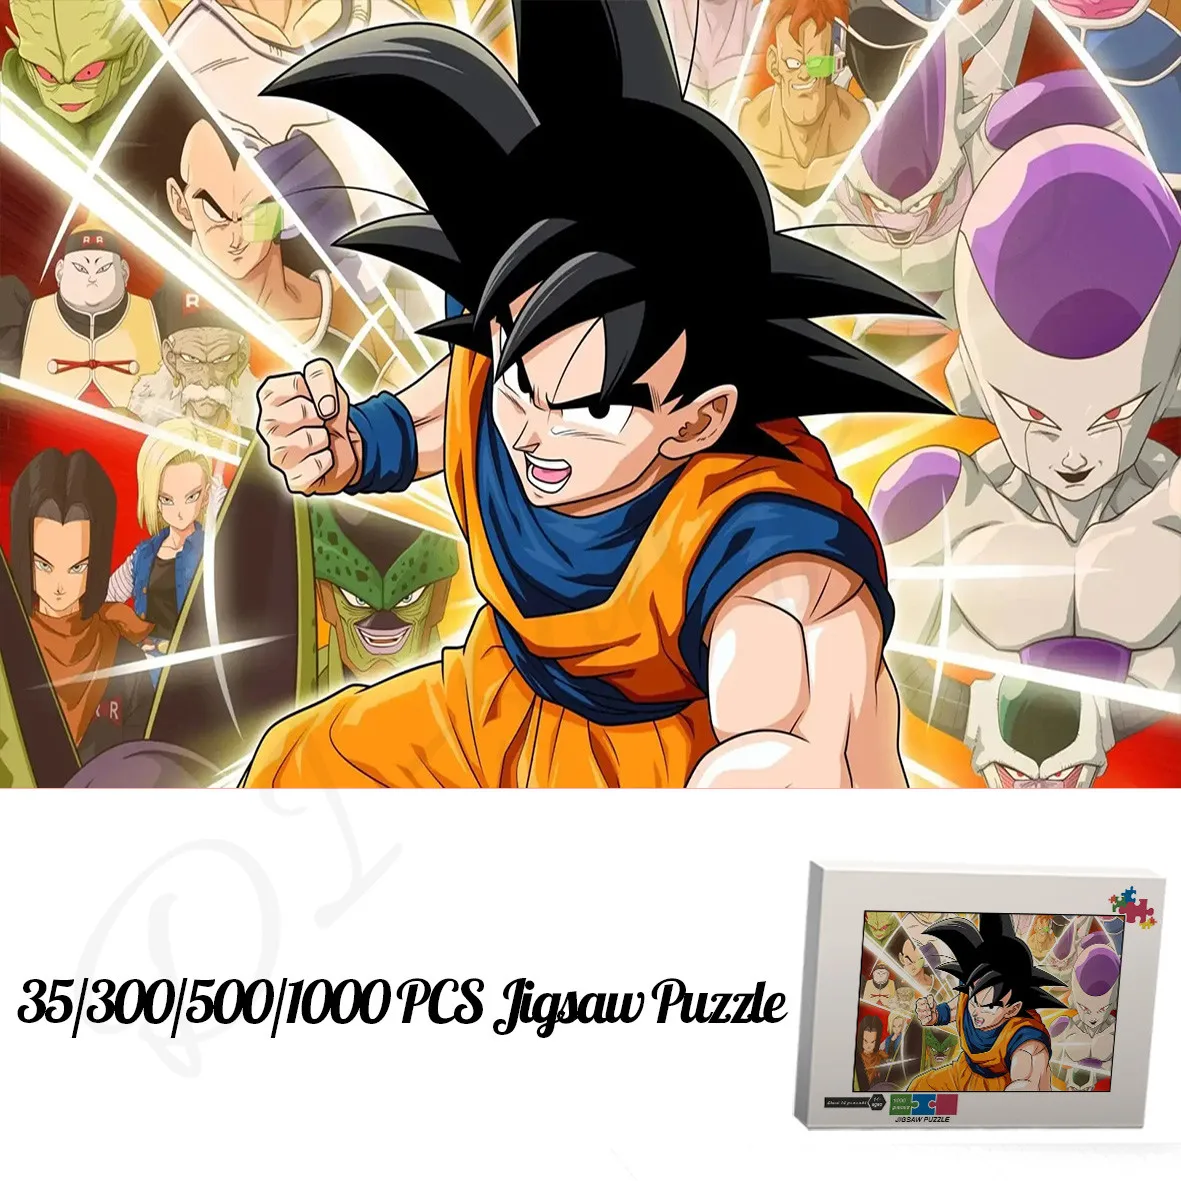 puzzles for adults jigsaw puzzles 234 pieces paper assembling picture landscape puzzles toys for children kids games educational Goku Jigsaw Puzzles for Kids and Adults Classic Anime Dragon Ball 1000 Pieces Wooden Puzzles Educational Toys for Entertainment